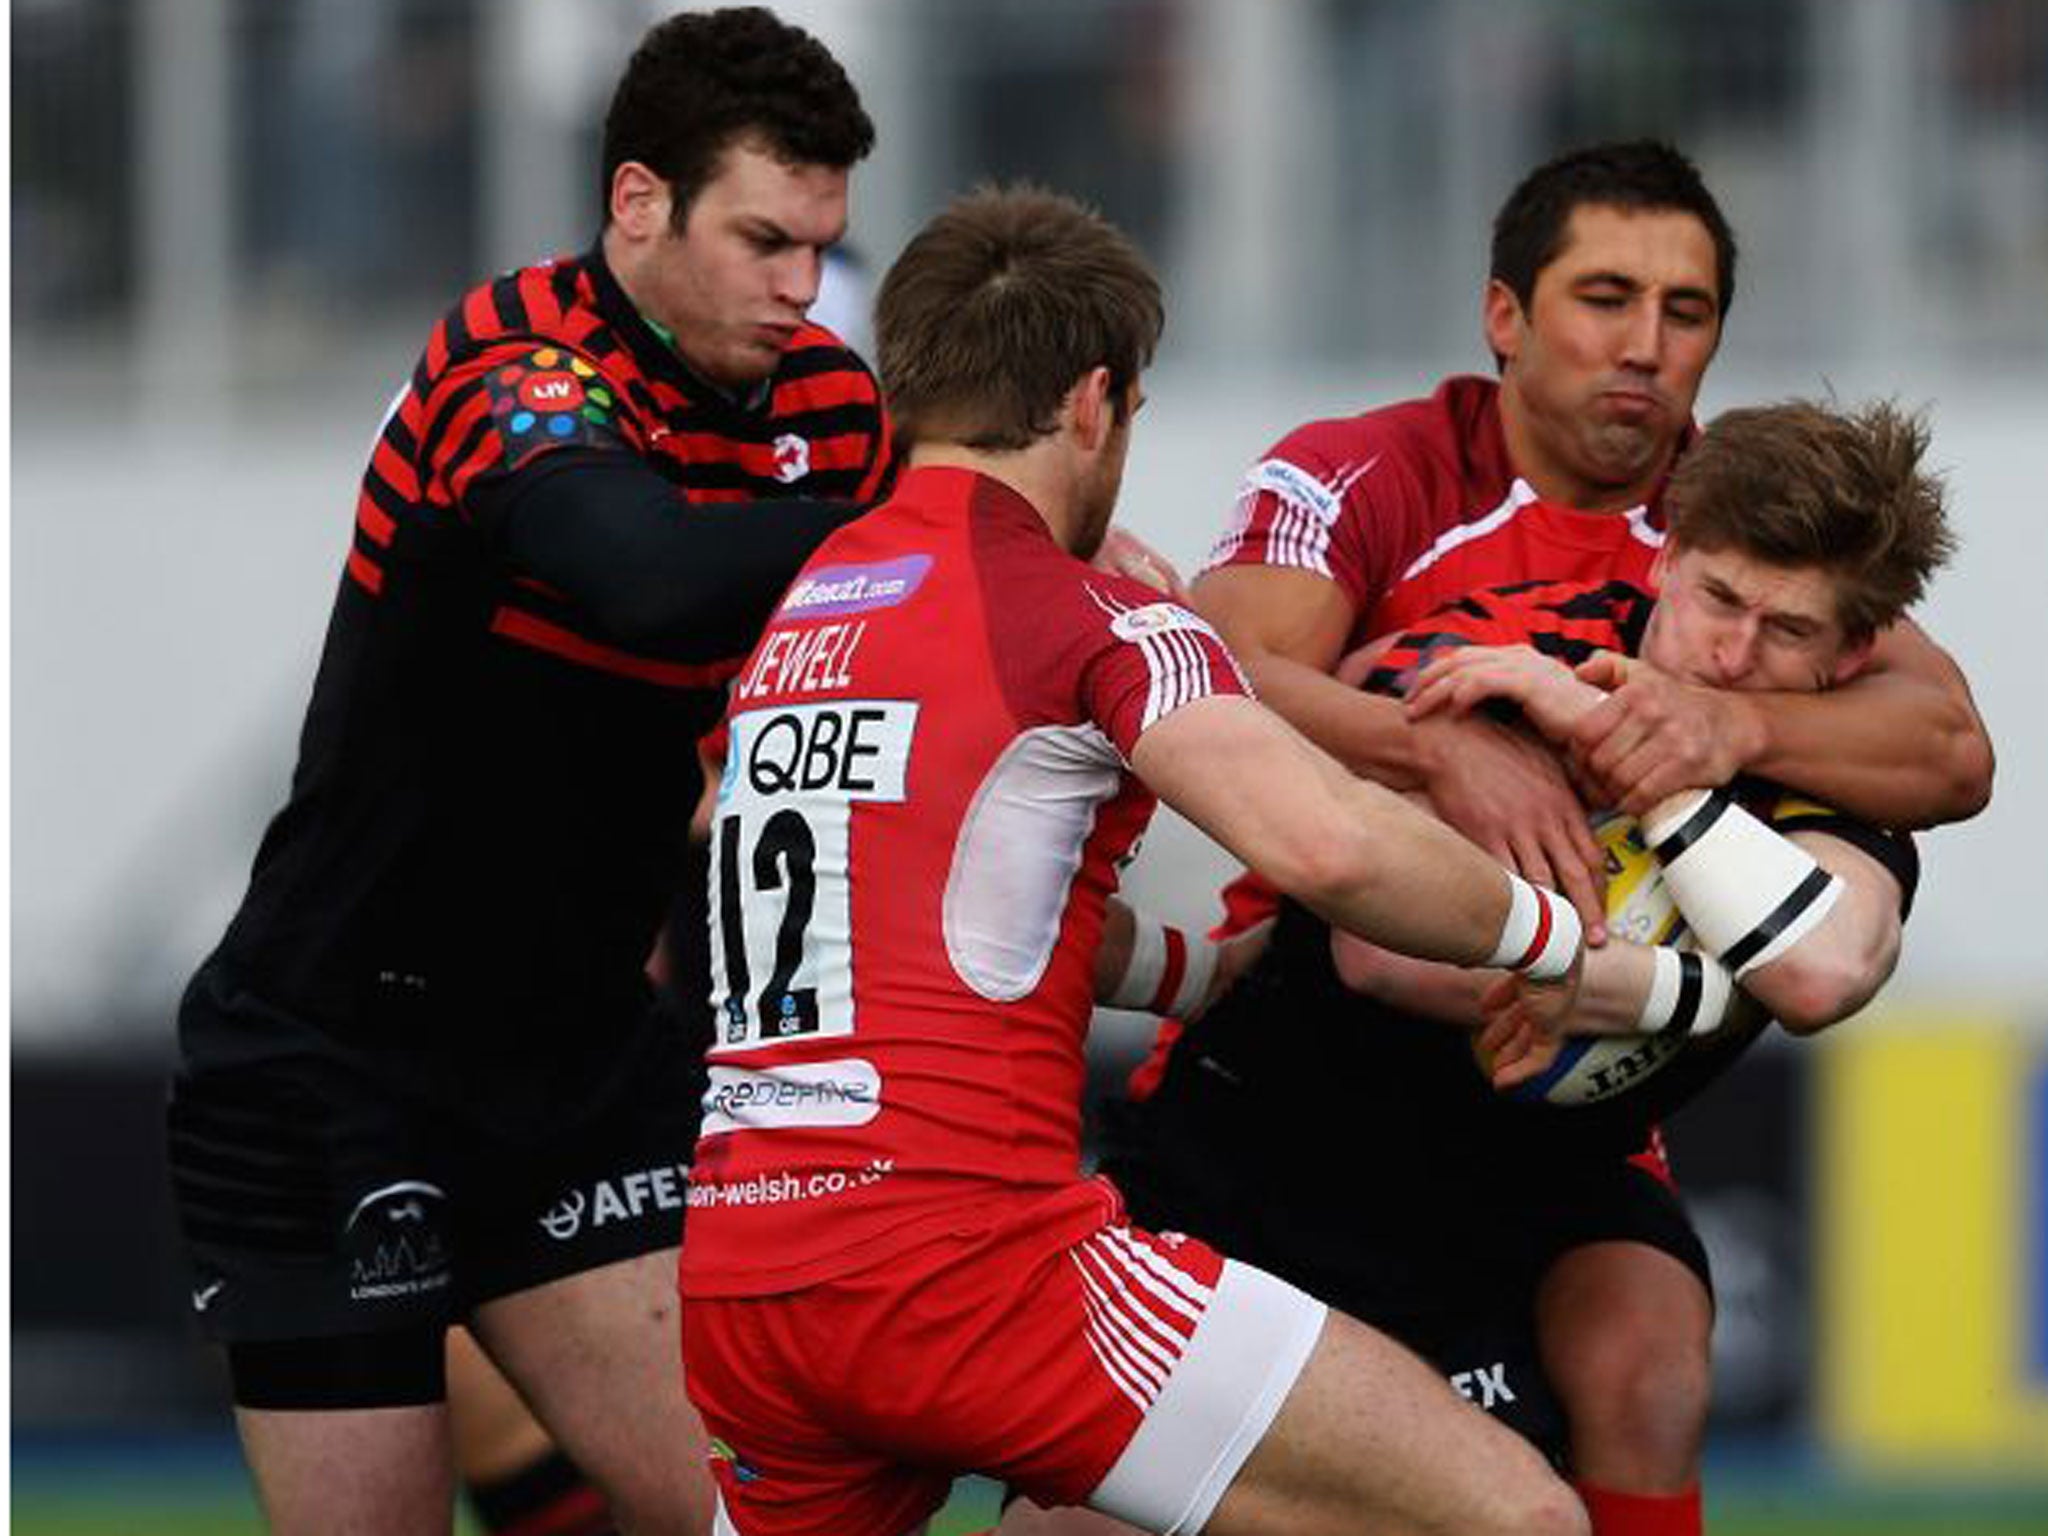 Gavin Henson, of London Welsh, ensures there is no way through for Saracens’ tryscorer David Strettle this time